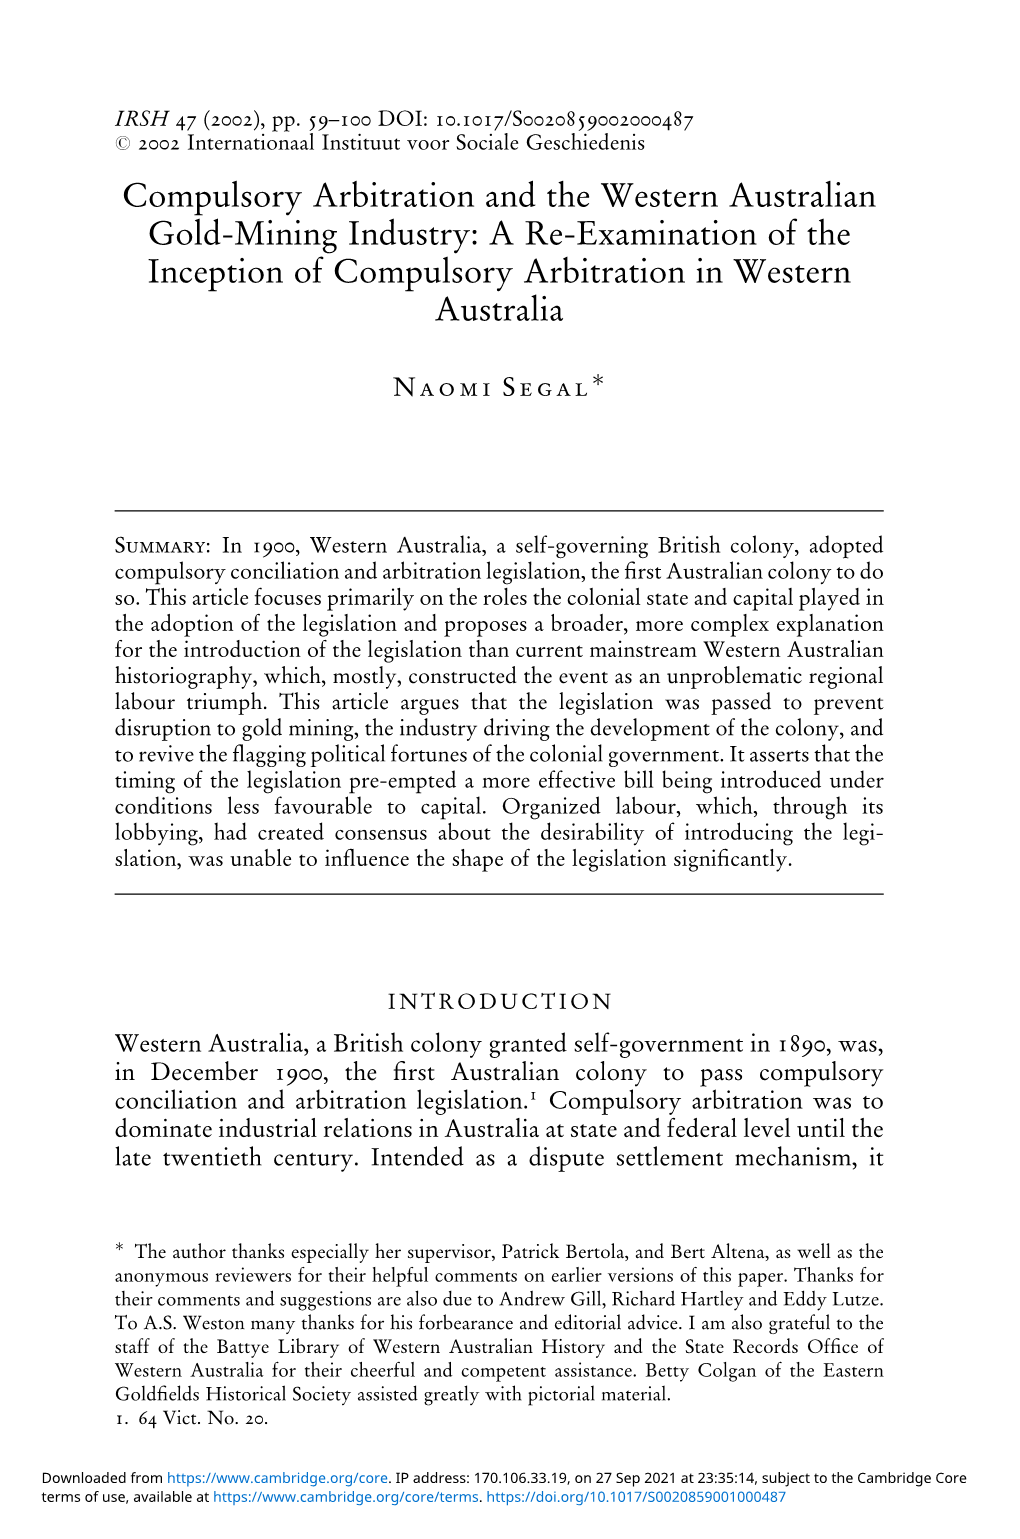 Compulsory Arbitration and the Western Australian Gold-Mining Industry: a Re-Examination of the Inception of Compulsory Arbitration in Western Australia